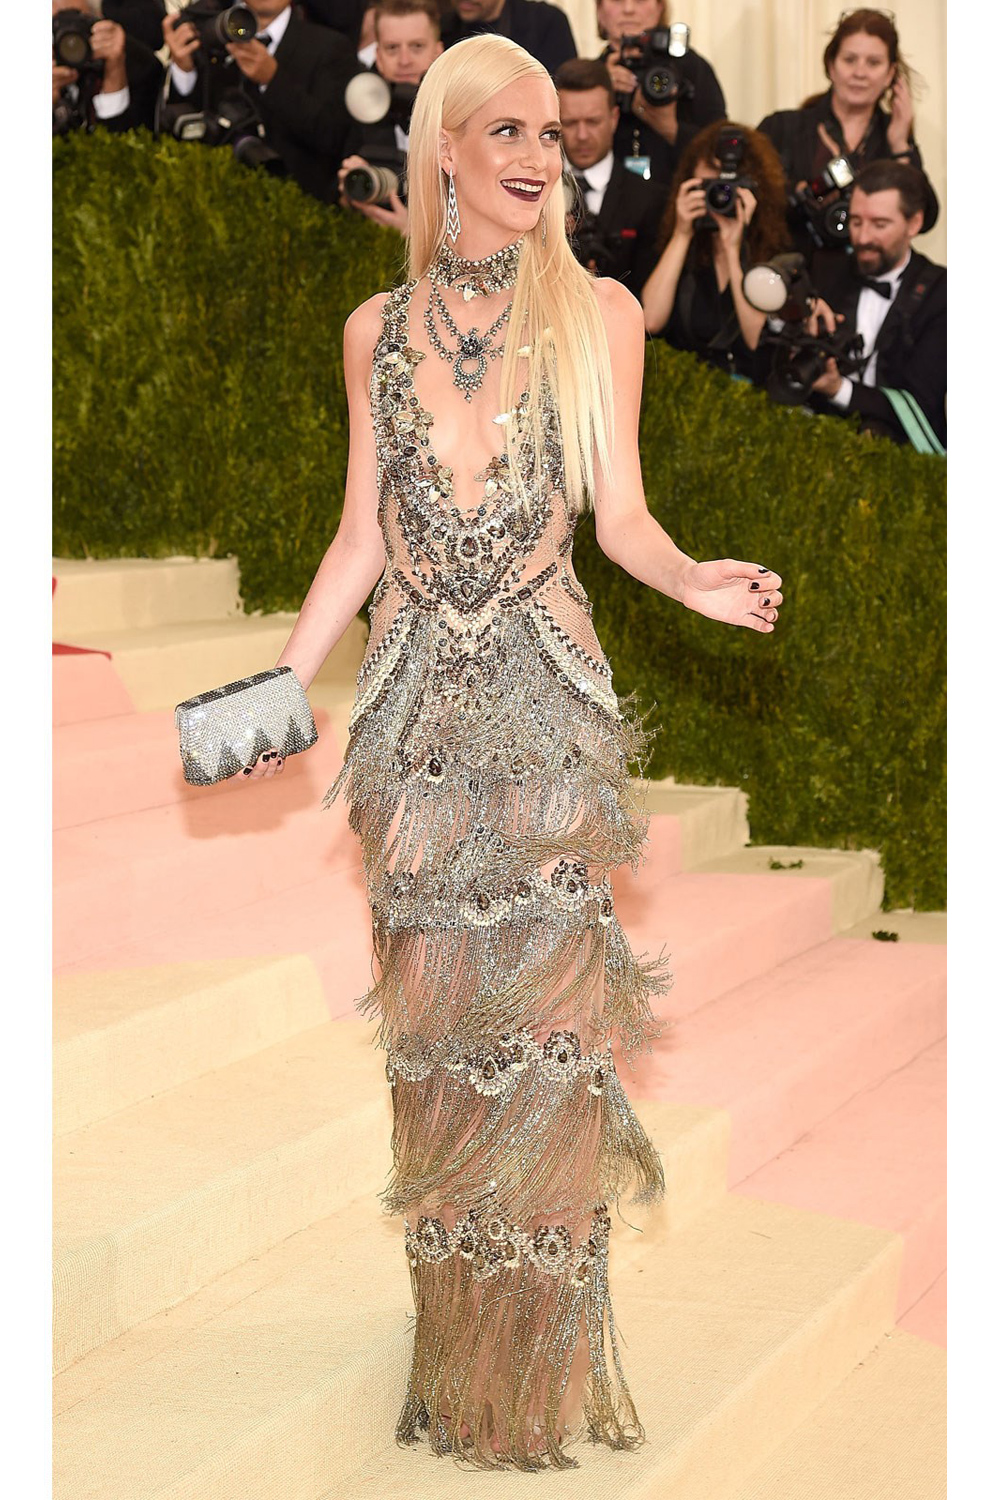 Poppy Delevingne in Marchesa at the 2016 Met Gala in New York.